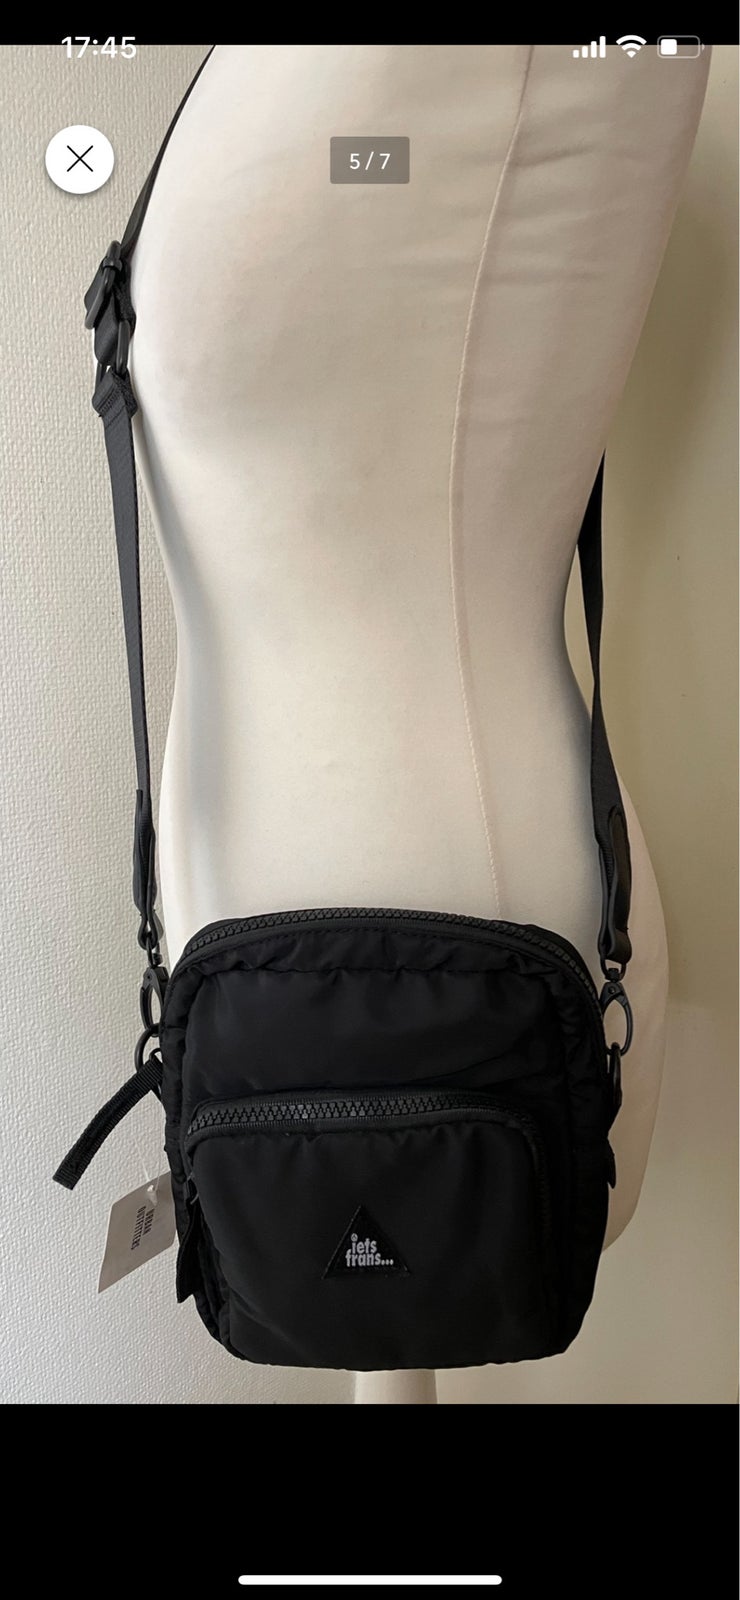 Crossbody, Urban Outfitters